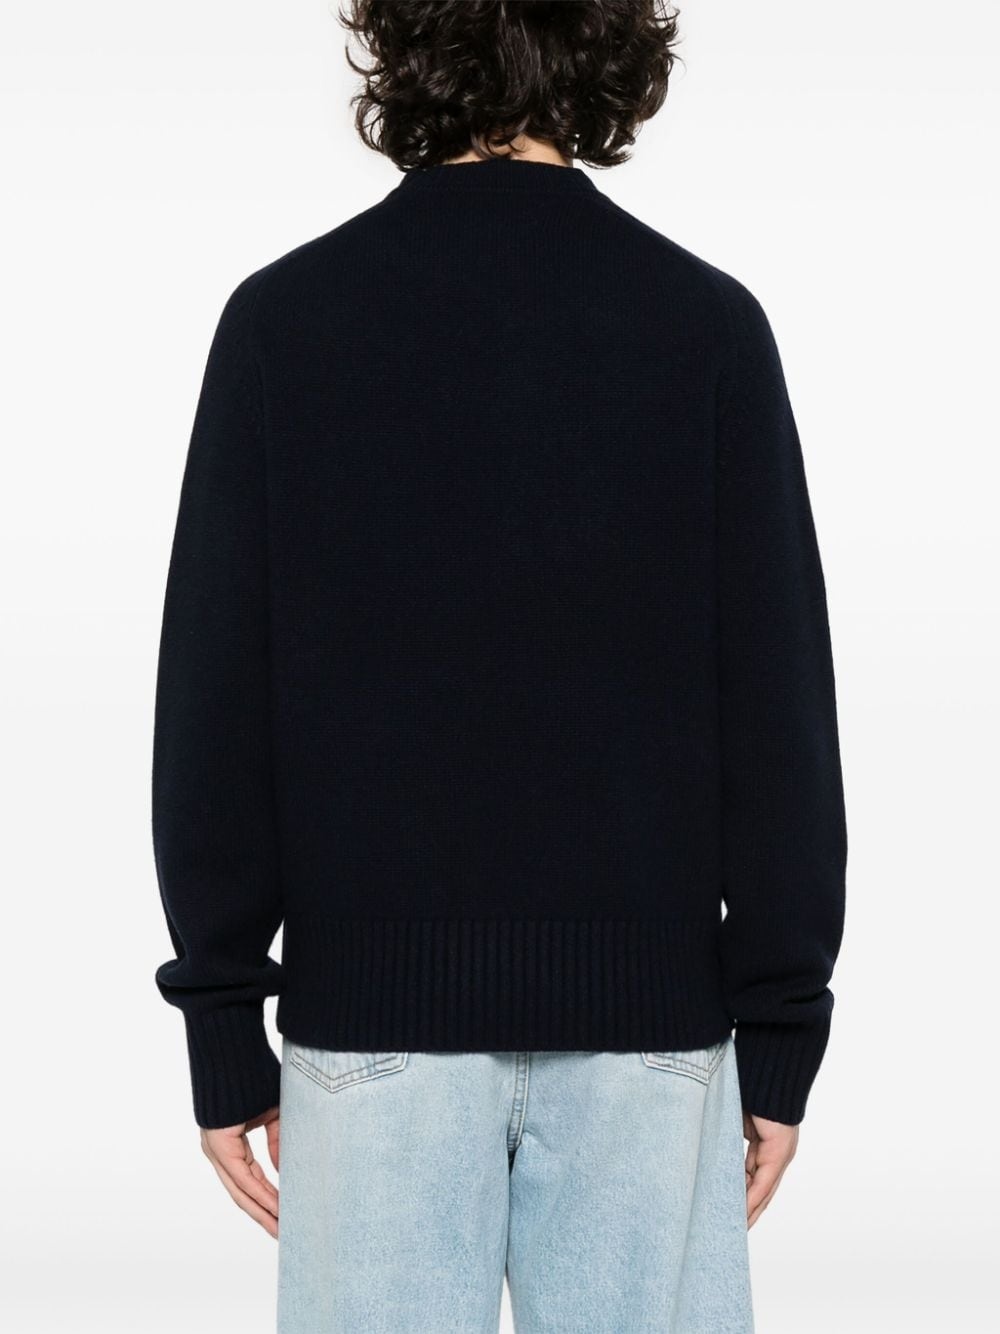 Bourgeois cashmere jumper - 4